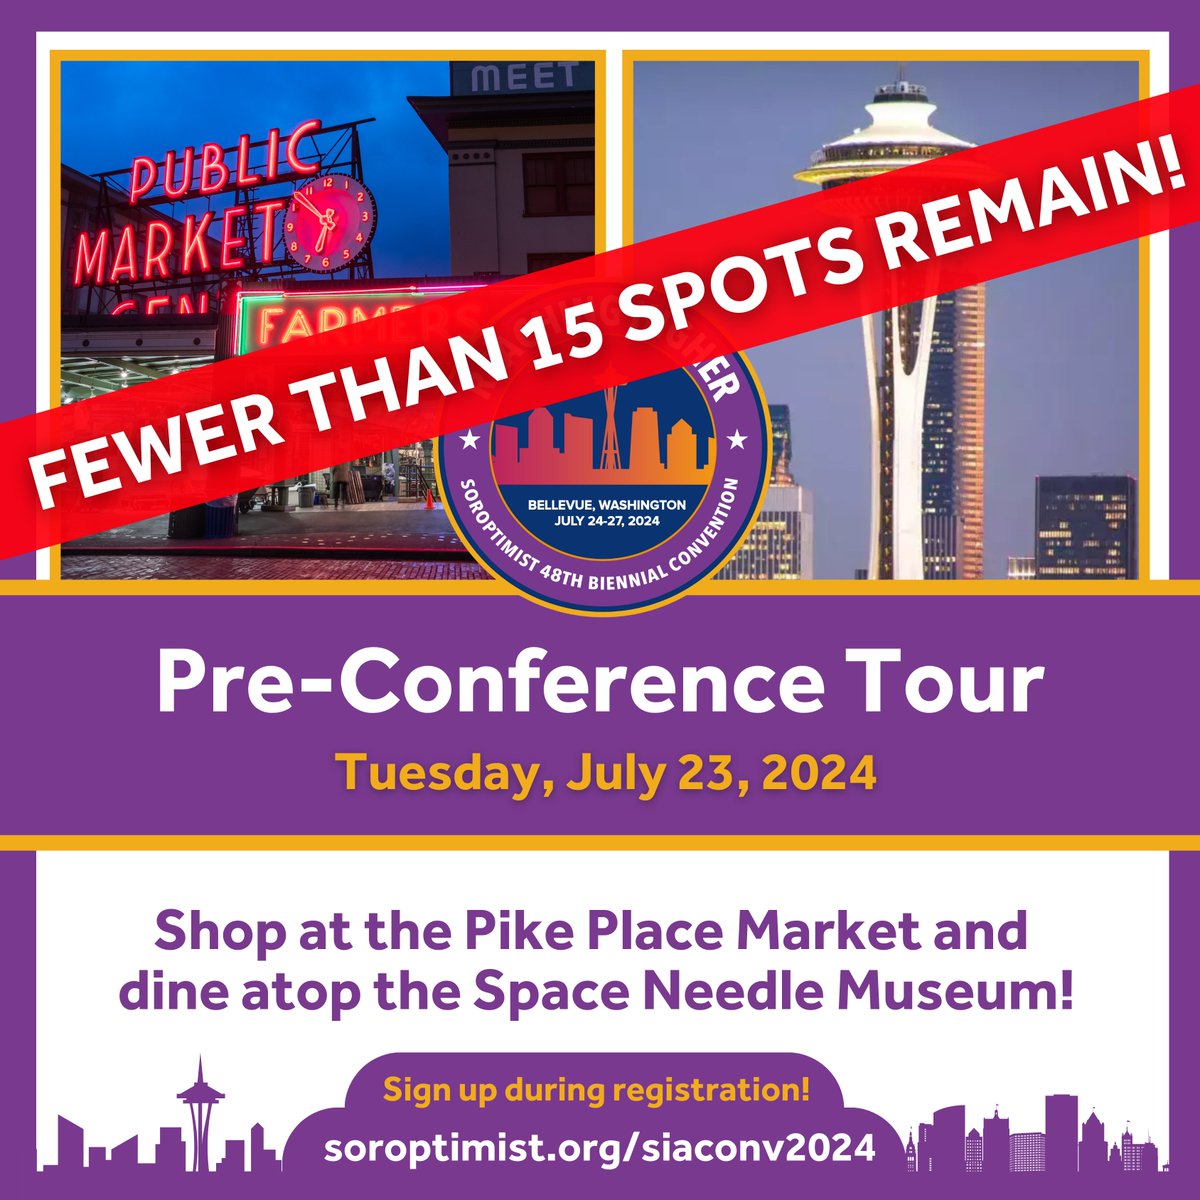 🚨Fewer than 15 spots remain! Book your pre-conference tour along with registration! Enjoy a day at the historical Pike Place Market and then dine atop the Space Needle Museum as a VIP 🍾 Register now: soroptimist.org/siaconv2024